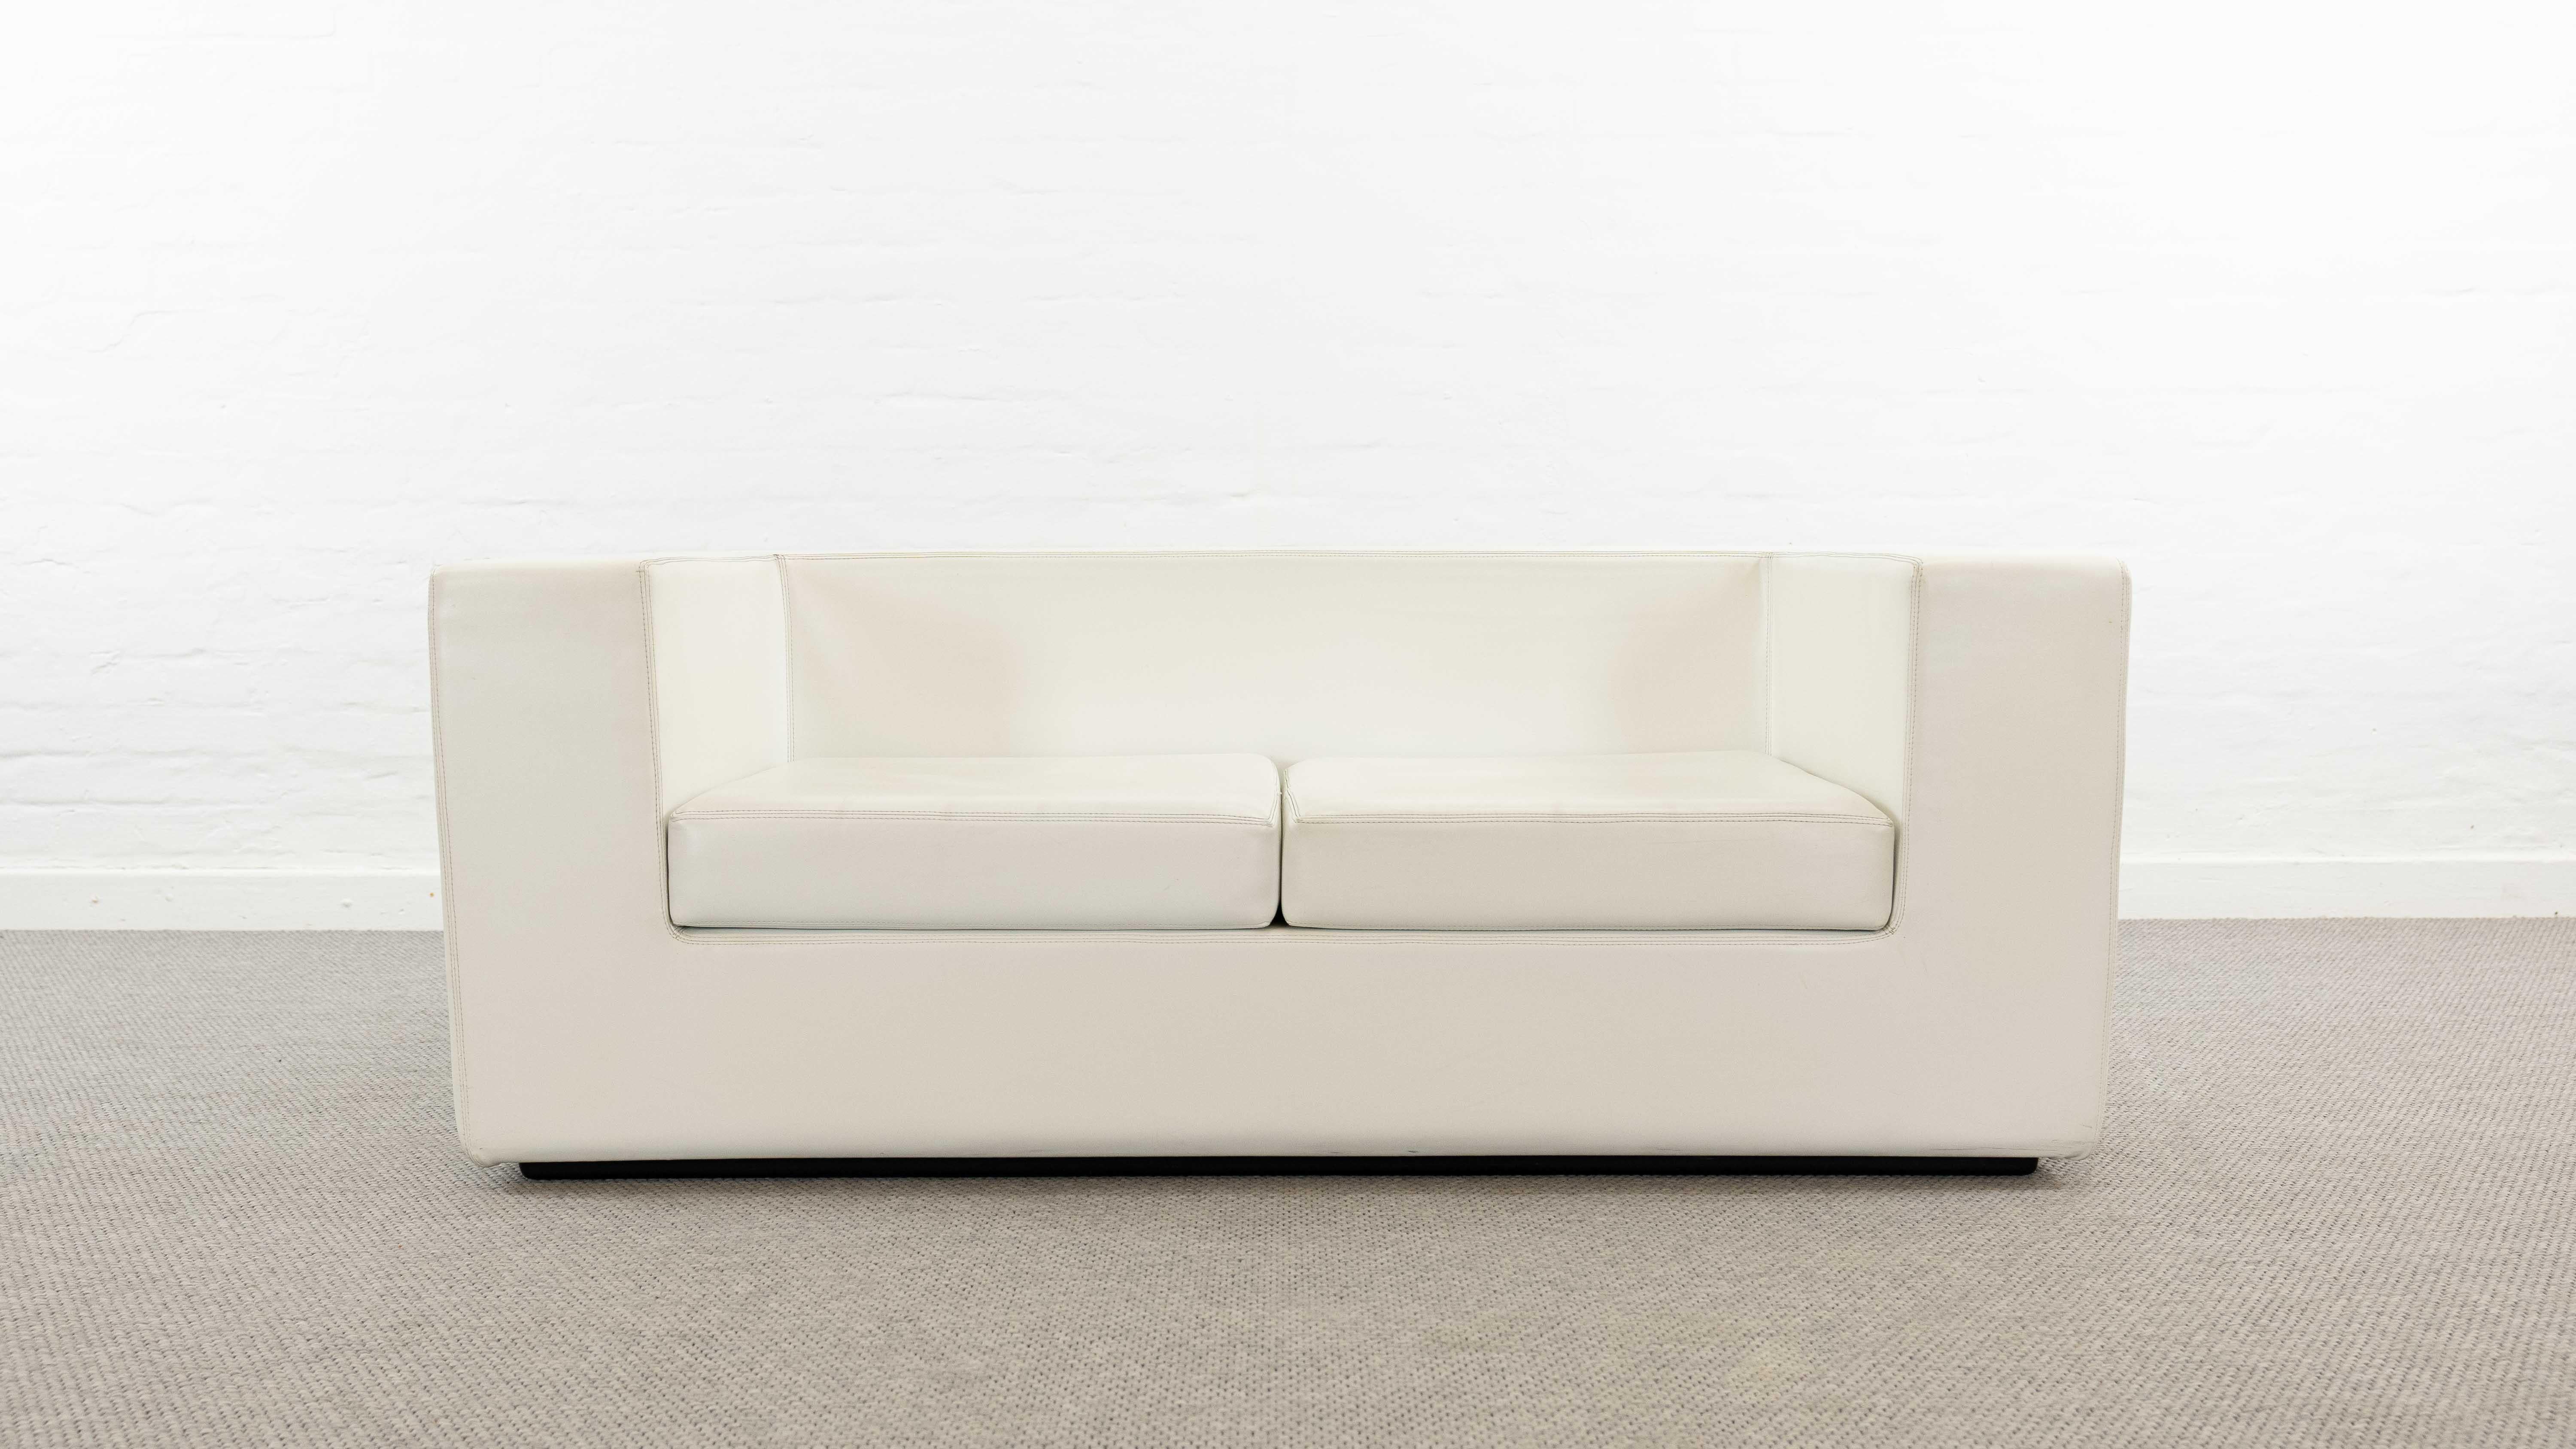 Vintage 2 seat sofa, model “ Throw Away“. Designed by Willie Landels 1965 for Zanotta, Italy. The Throw Away Series was the first sofa/armchair made from expanded polyurethane foam. Upholstered in original white /offwhite vinyl. This is a production